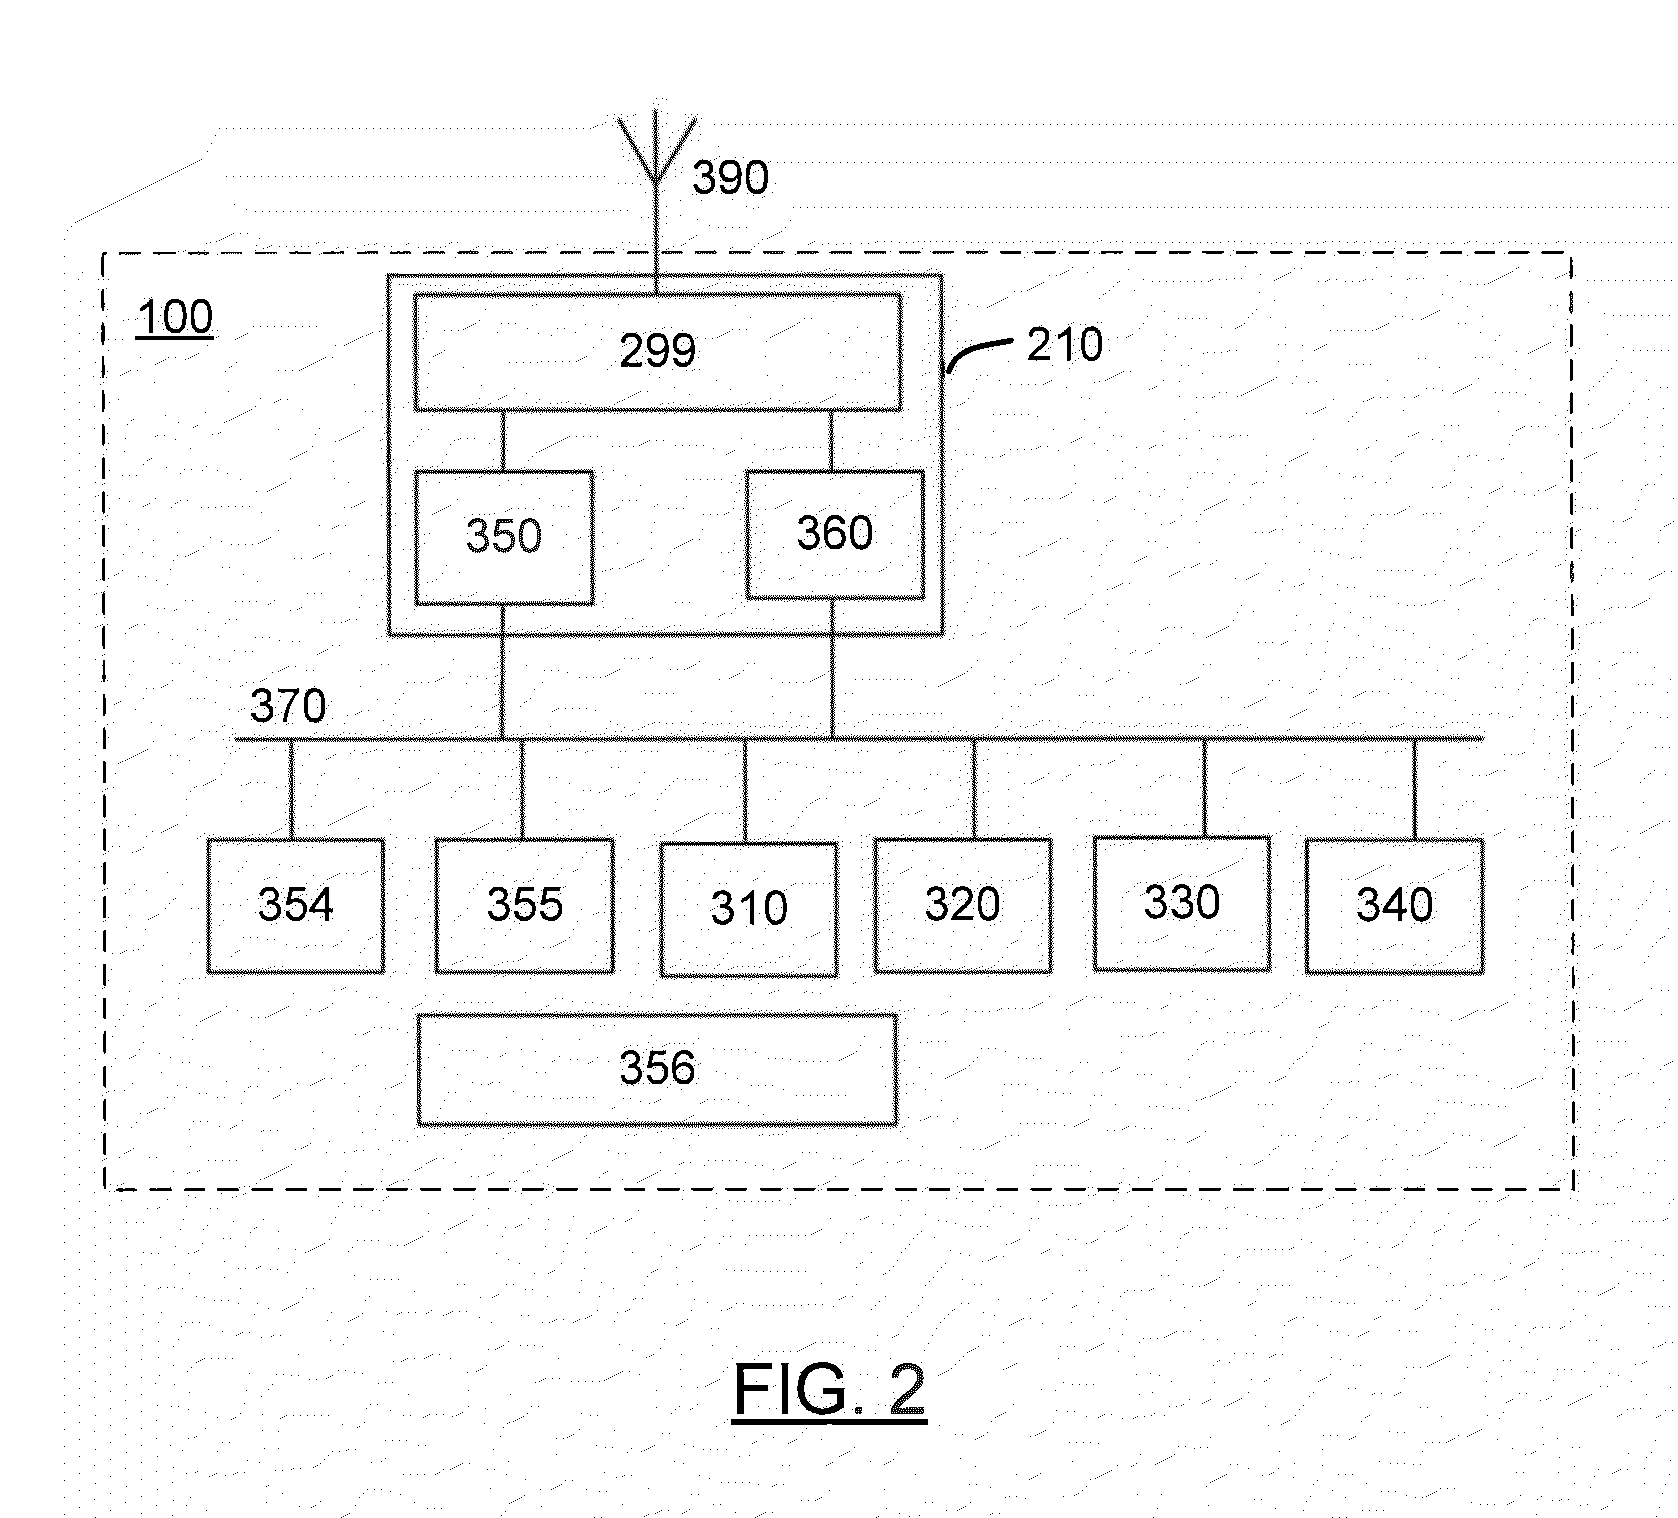 Encoded information reading terminal with micro-electromechanical radio frequency front end